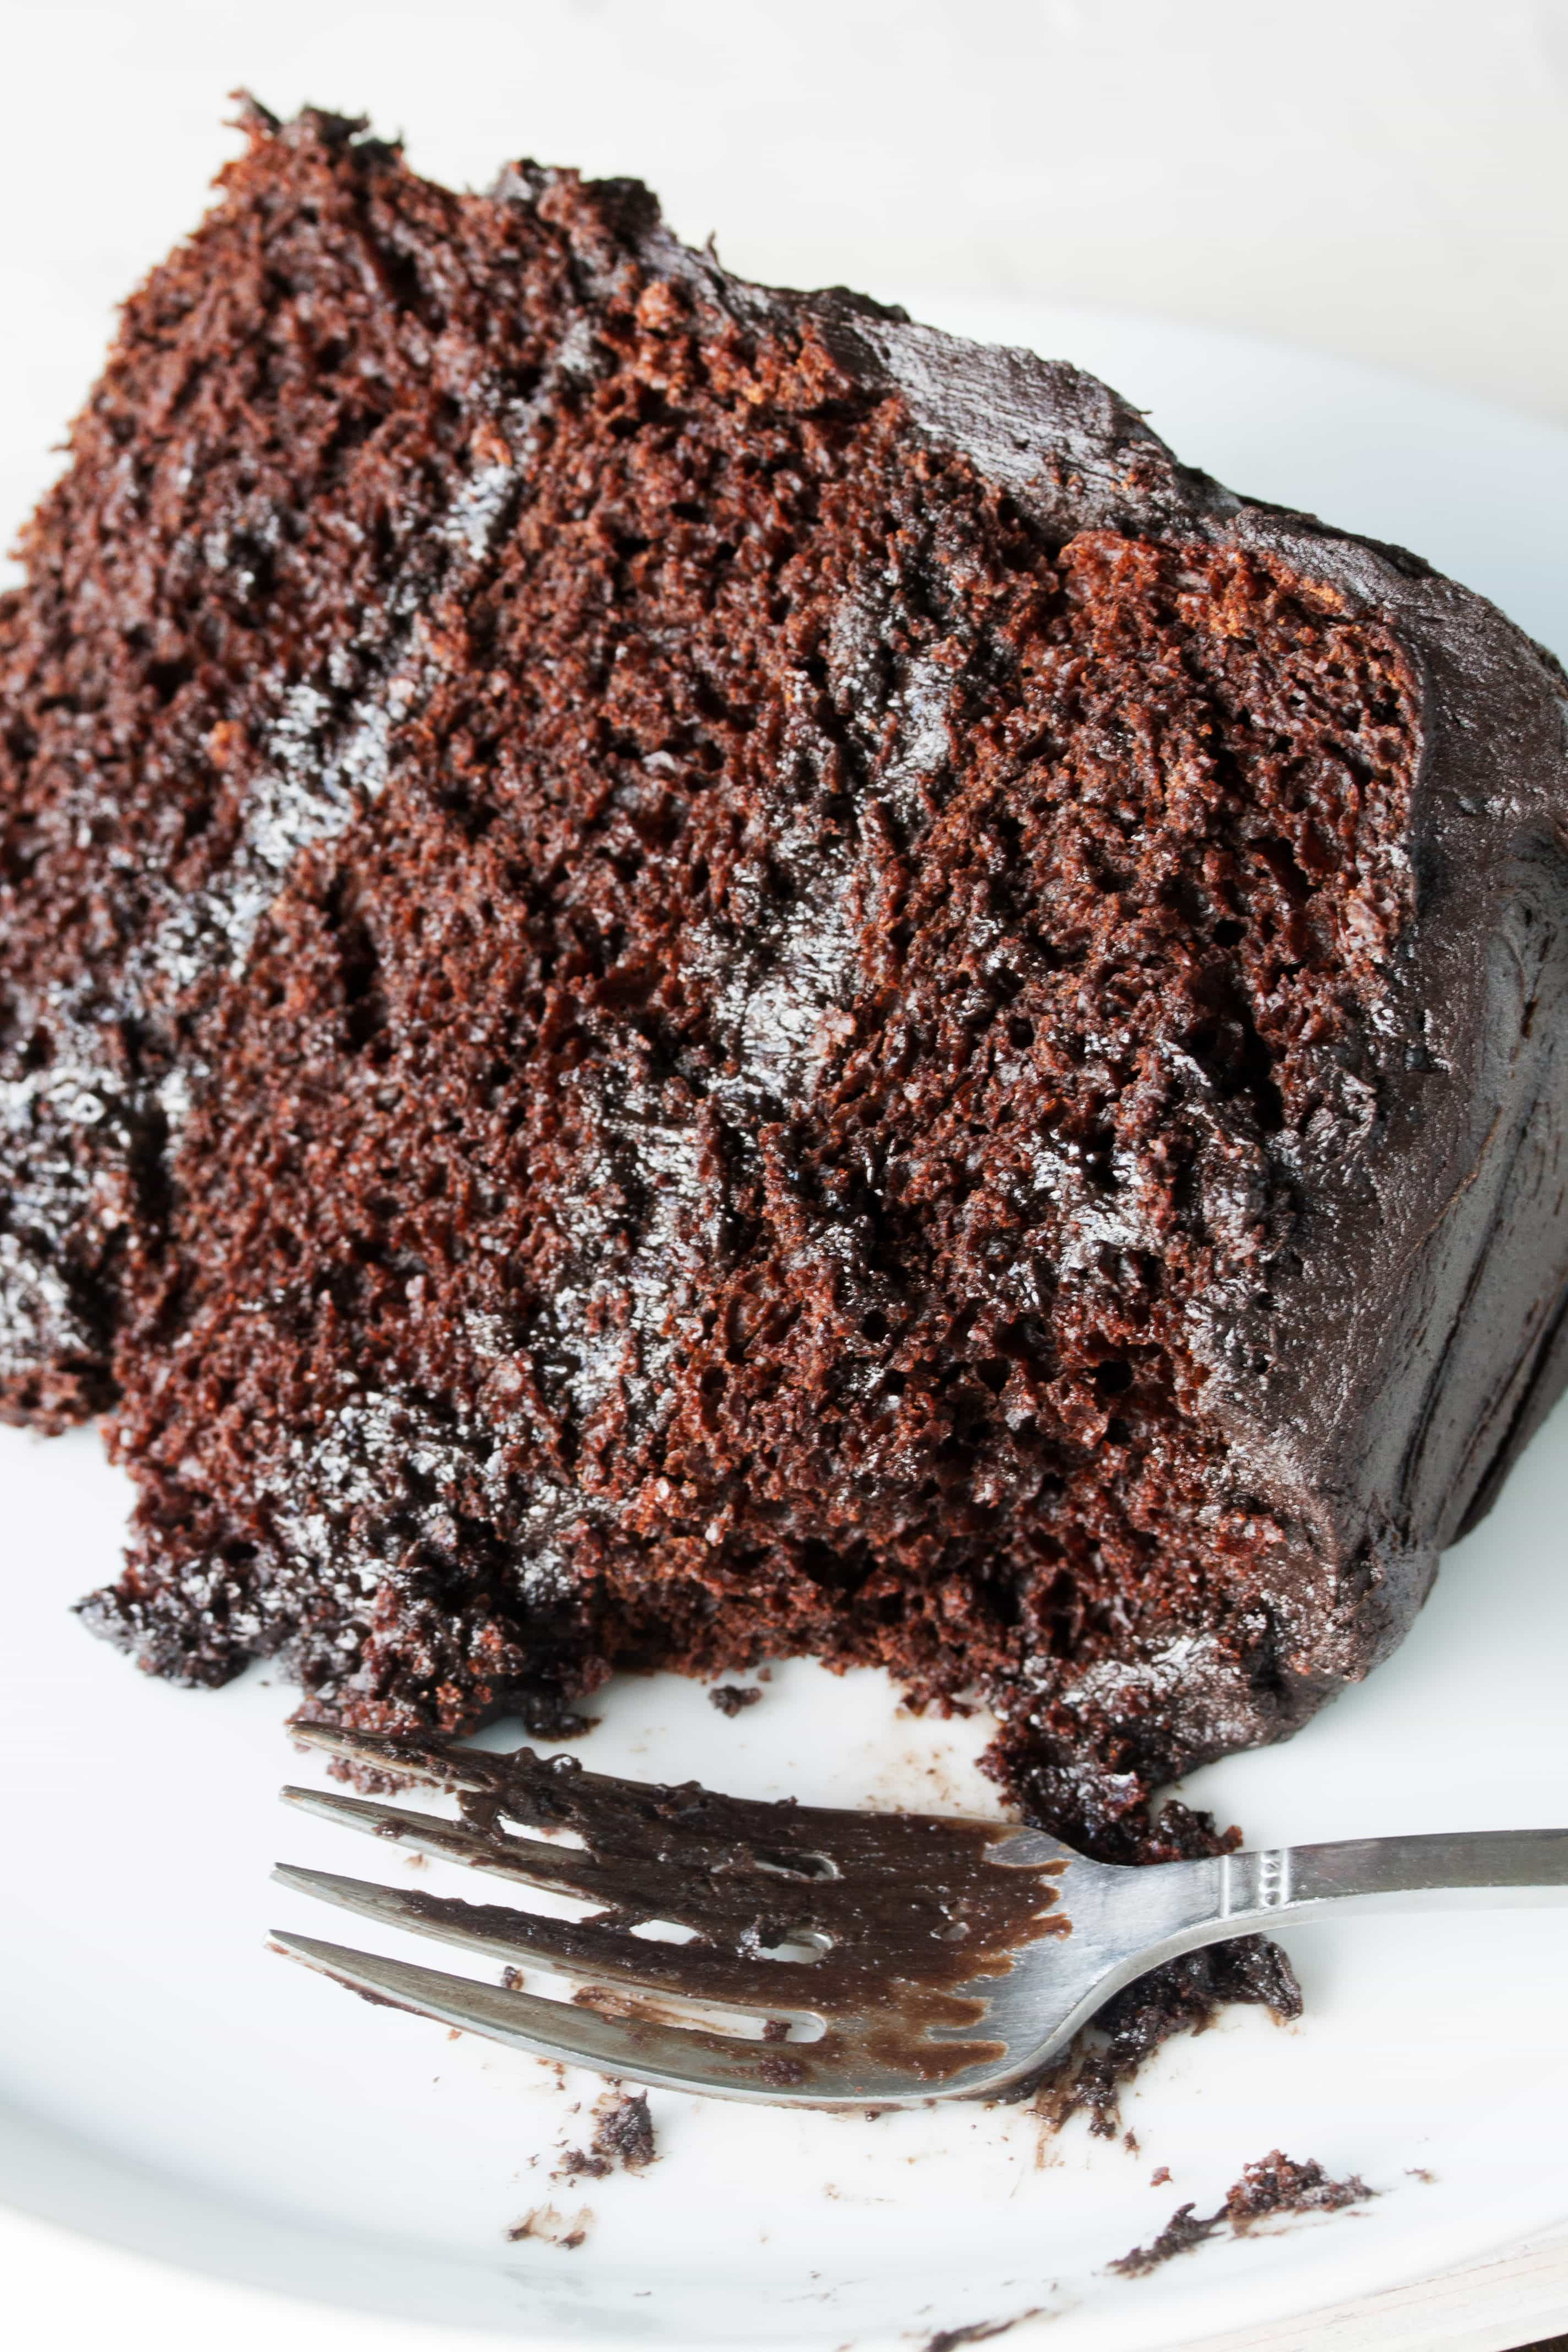 The Most Amazing Chocolate Cake
 The Most Amazing Chocolate Cake thestayathomechef